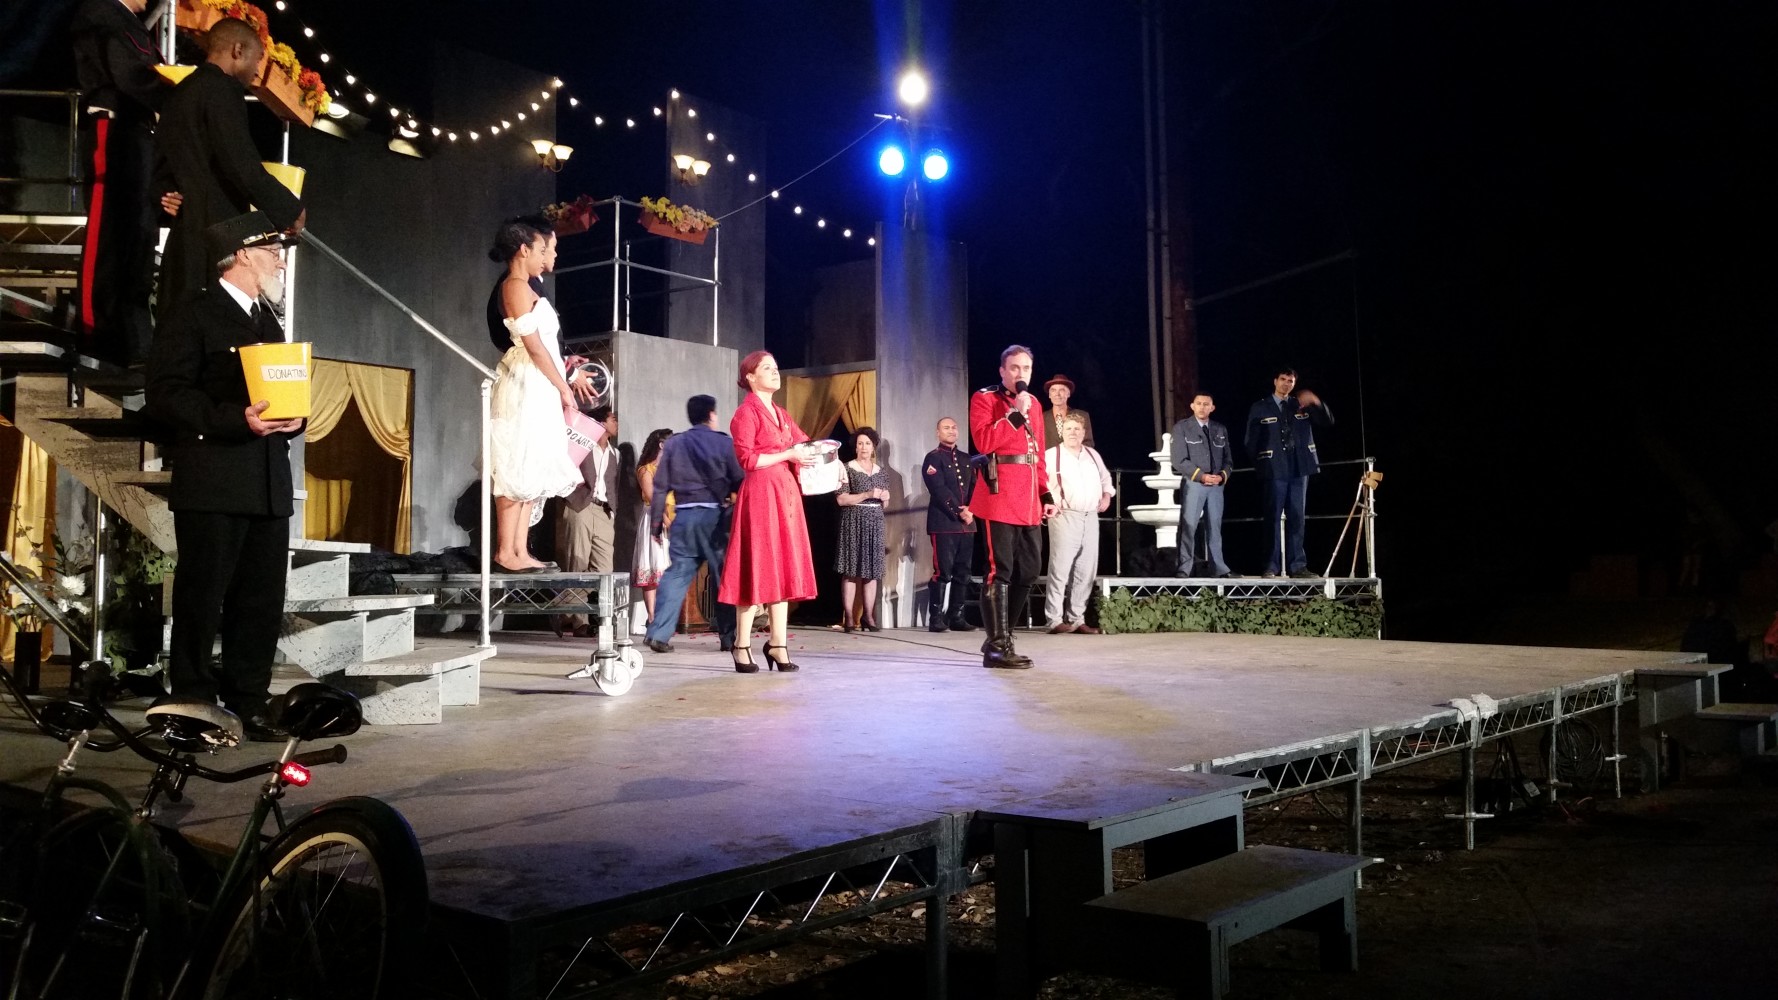 The cast of Much Ado About Nothing humbly requests donations after the performance.